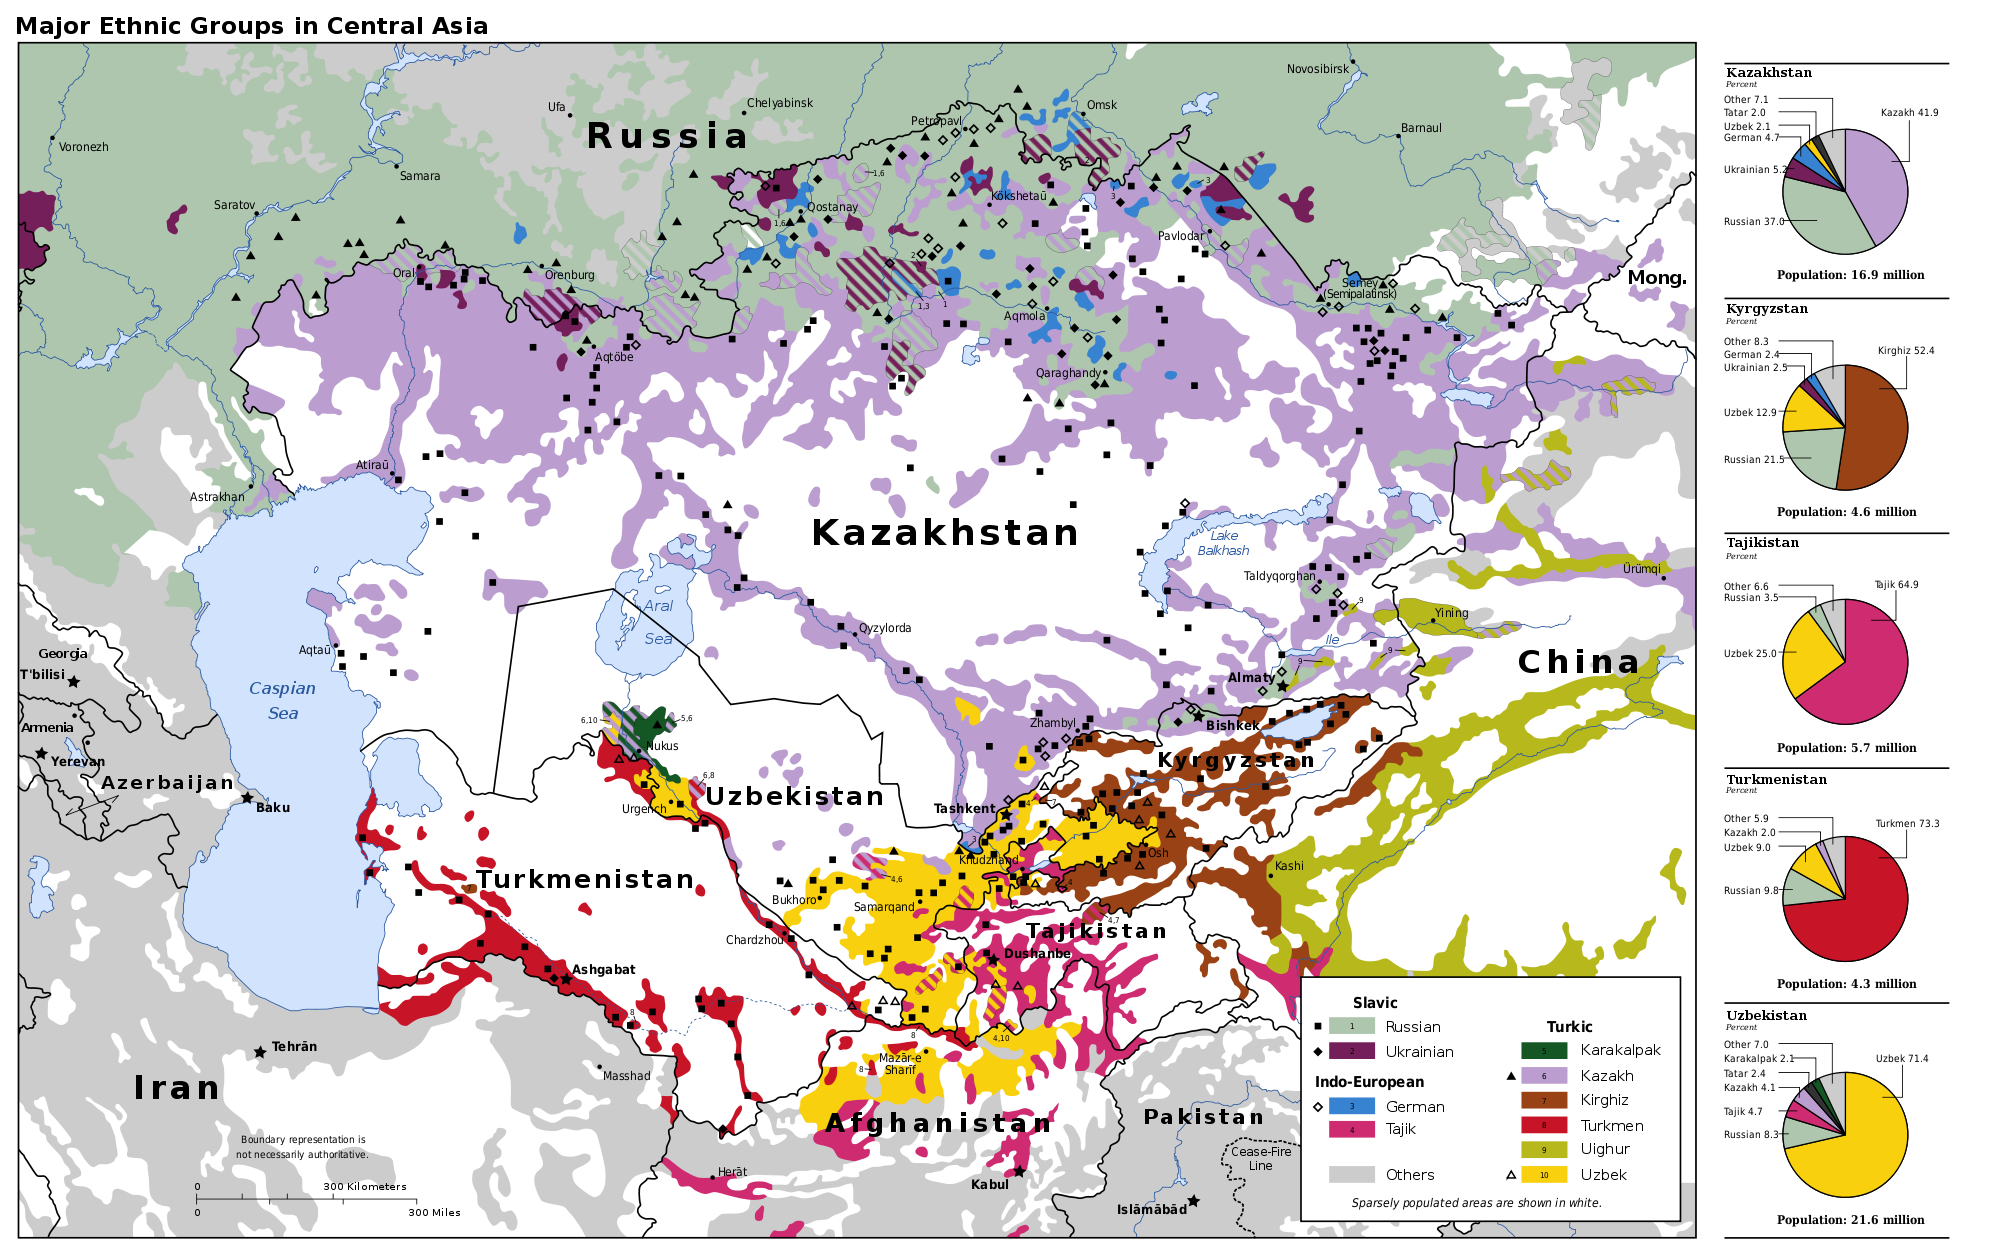 http://anthropologynet.files.wordpress.com/2010/09/ethnicities-of-central-asia.png